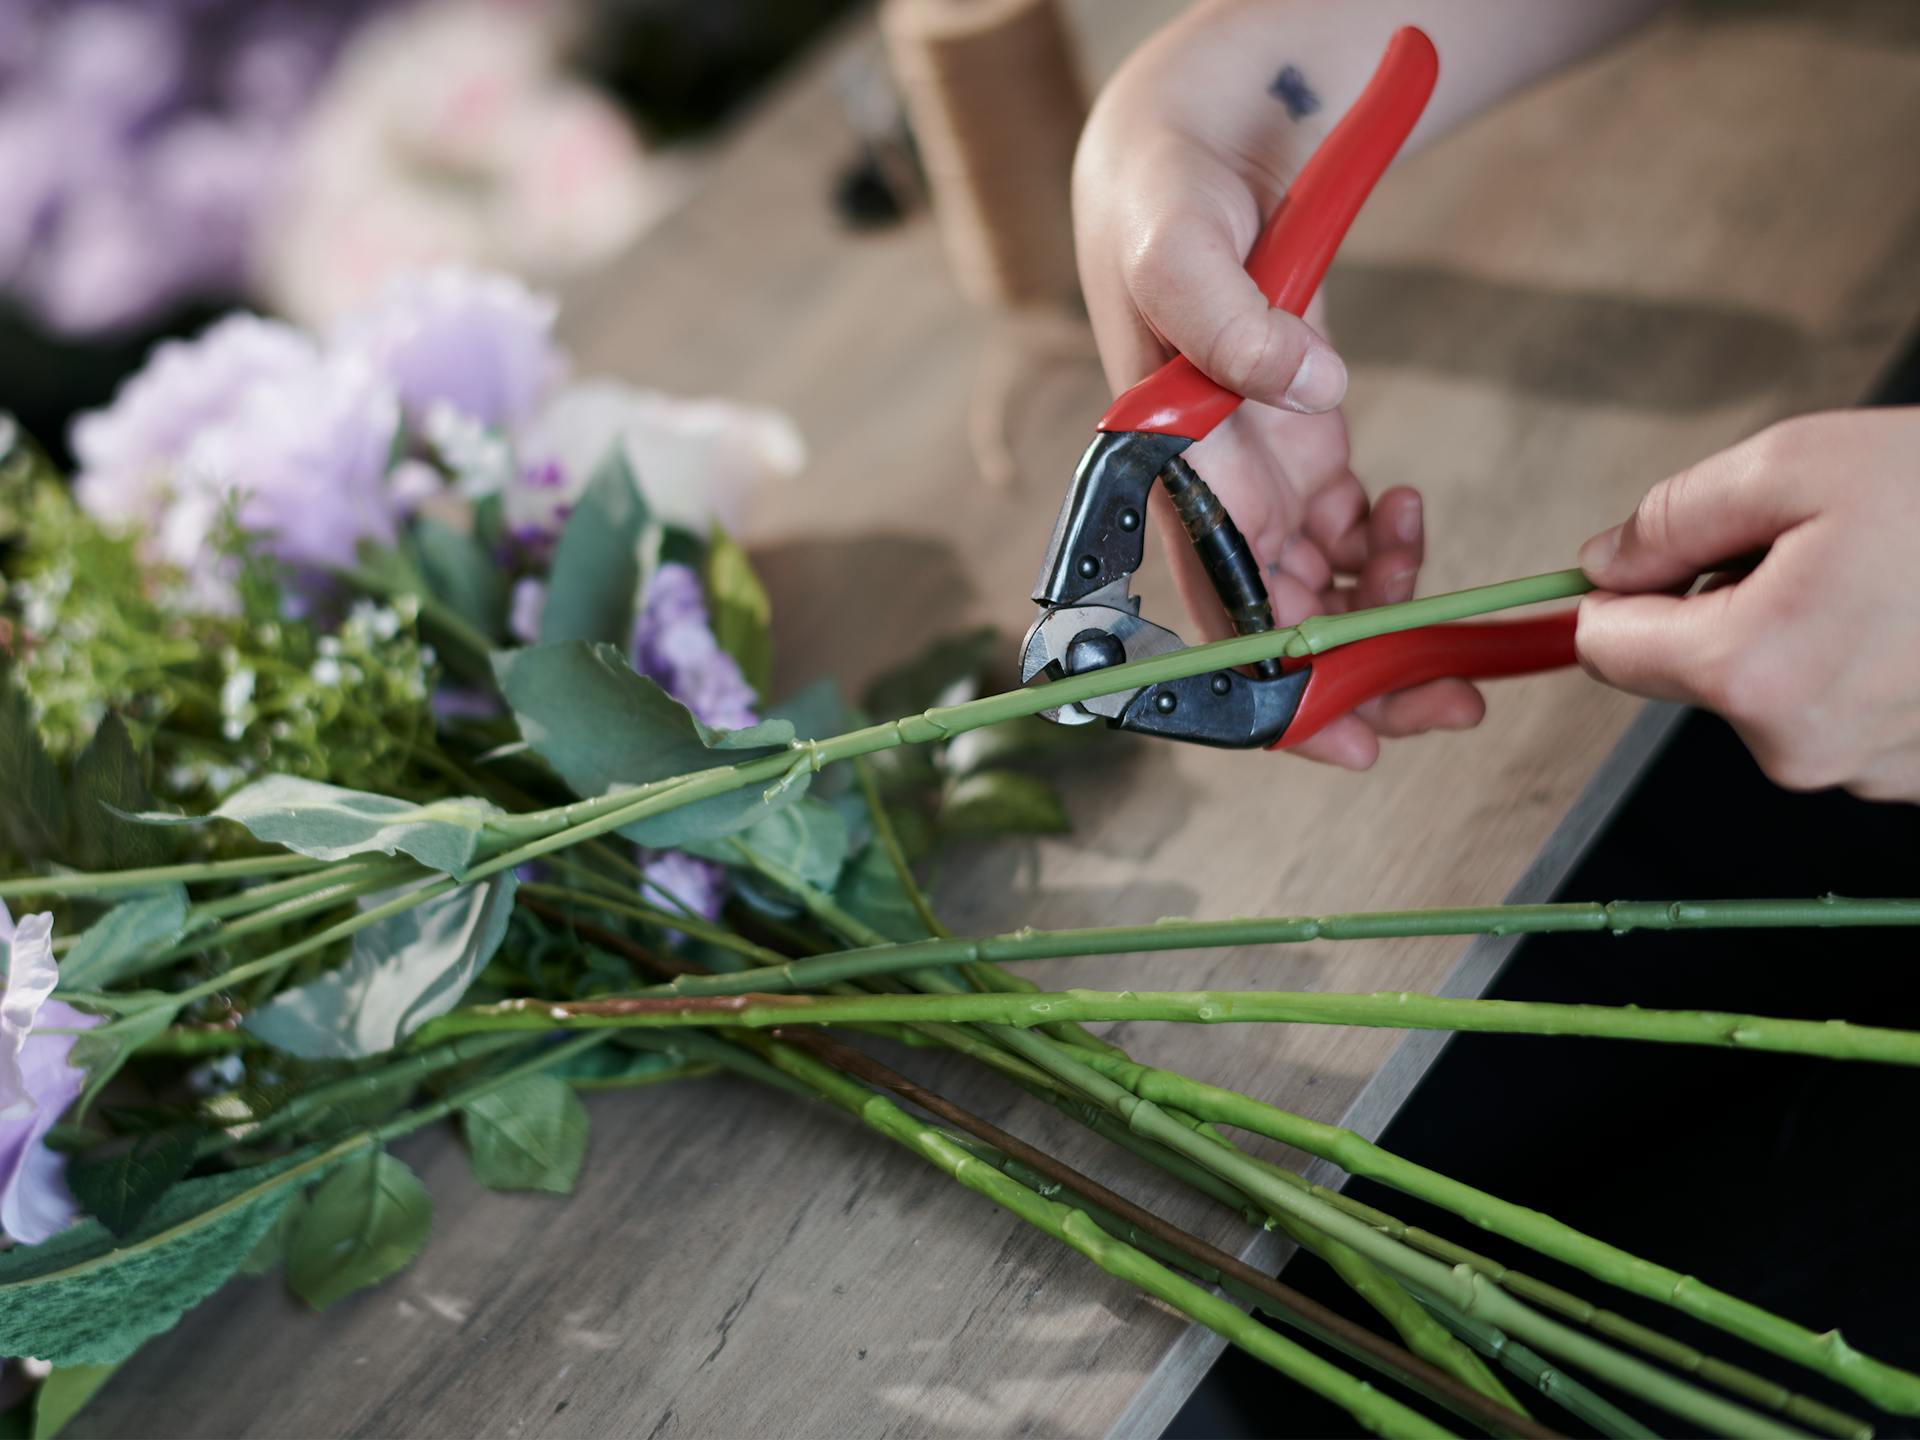 How to trim artificial flower stem - blog post by Blooming Artificial